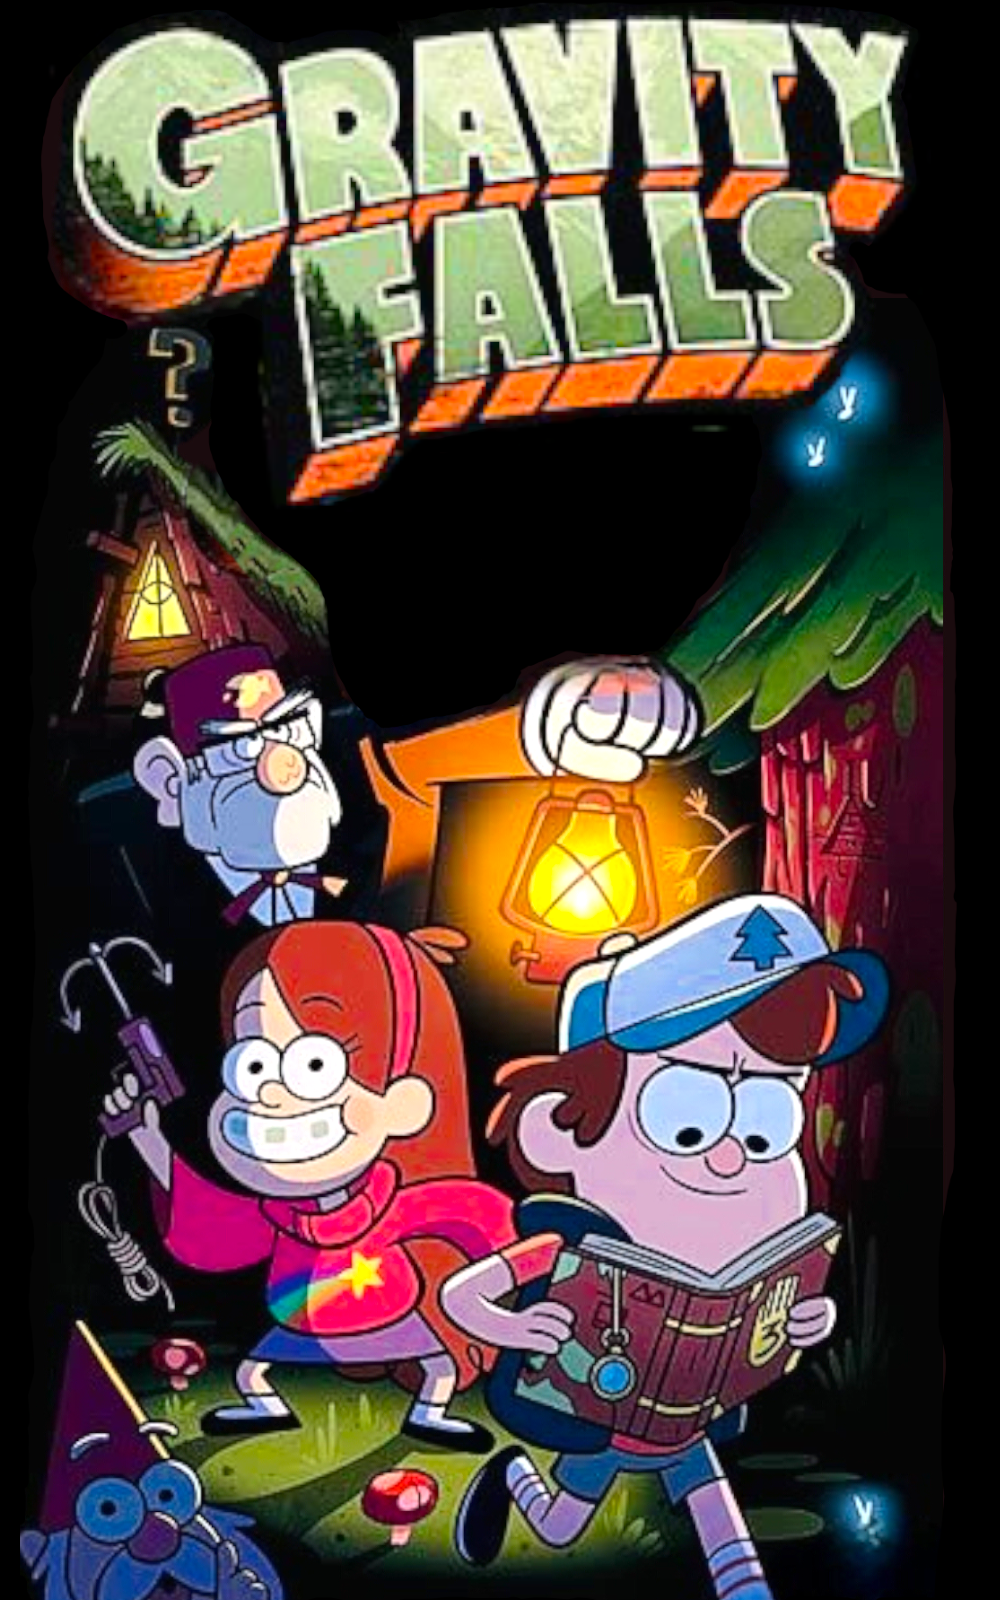 36" x 60" Gravity Falls Tapestry Wall Hanging Décor